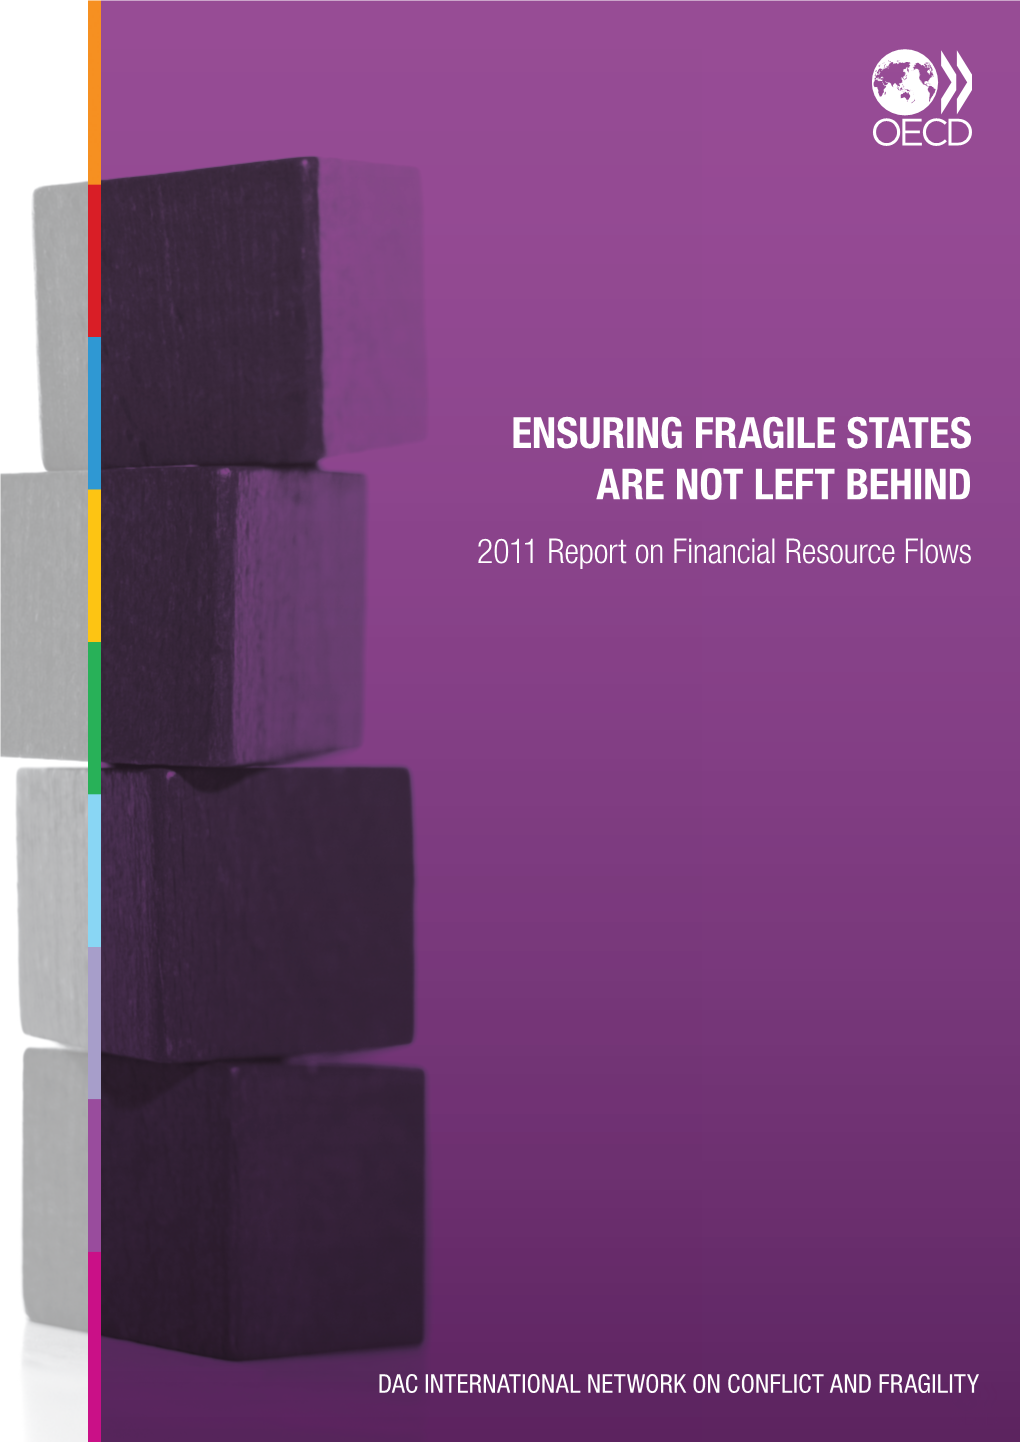 ENSURING FRAGILE STATES ARE NOT LEFT BEHIND 2011 Report on Financial Resource Flows